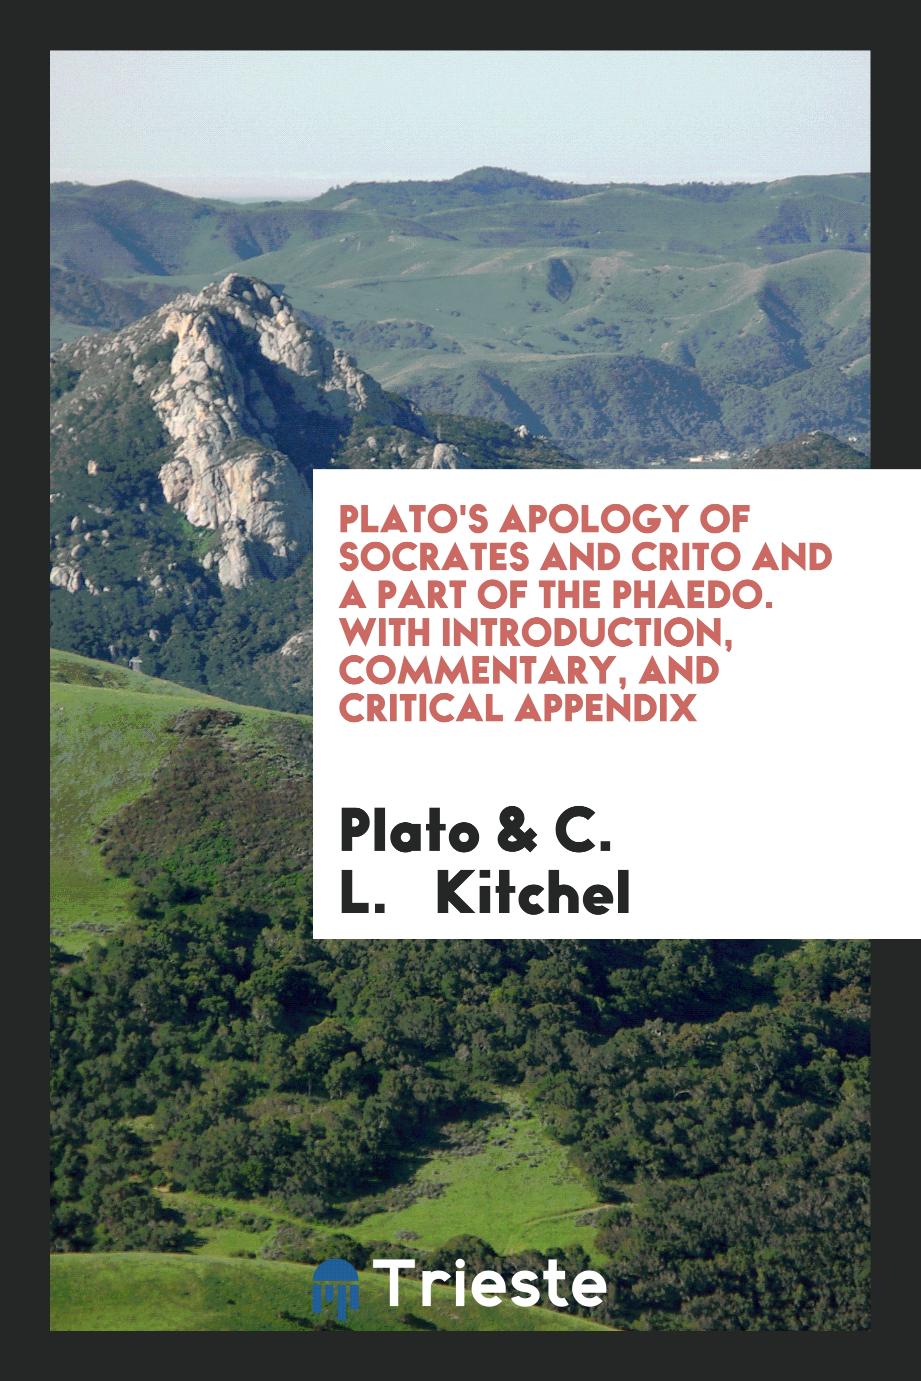 Plato's Apology of Socrates and Crito and a Part of the Phaedo. With Introduction, Commentary, and Critical Appendix